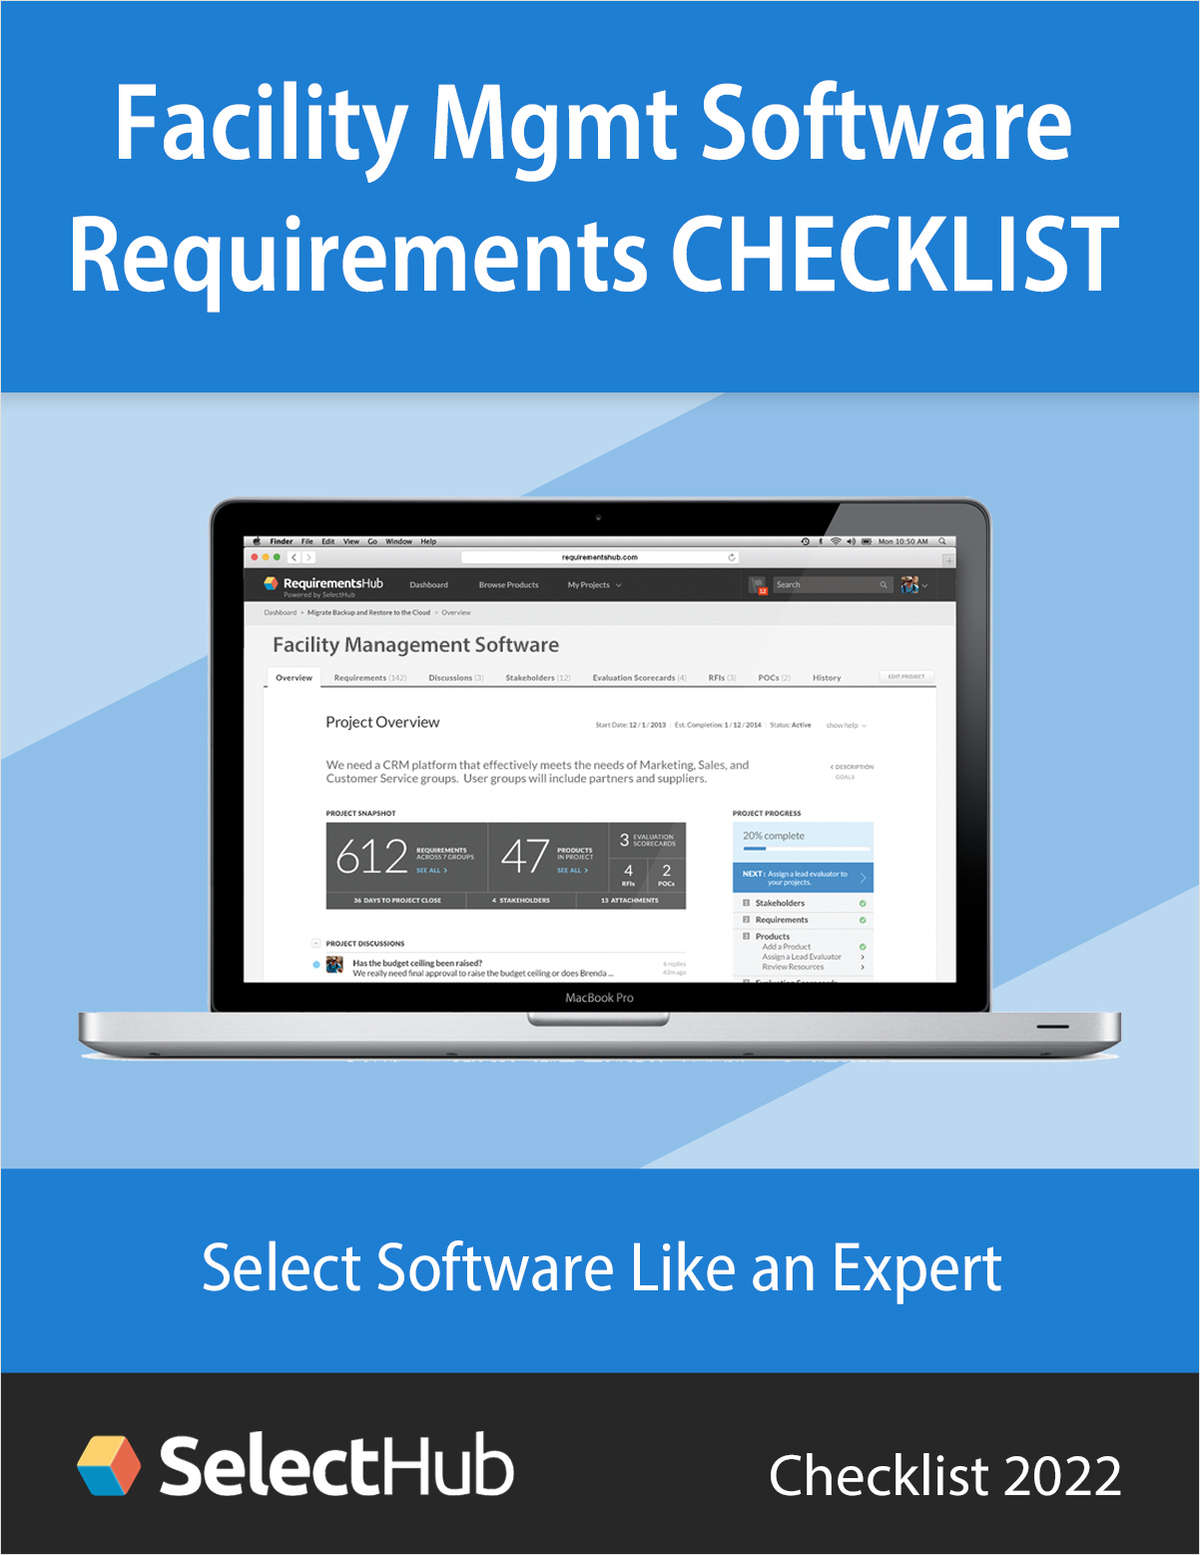 Facility Management Software Requirements Checklist for 2022